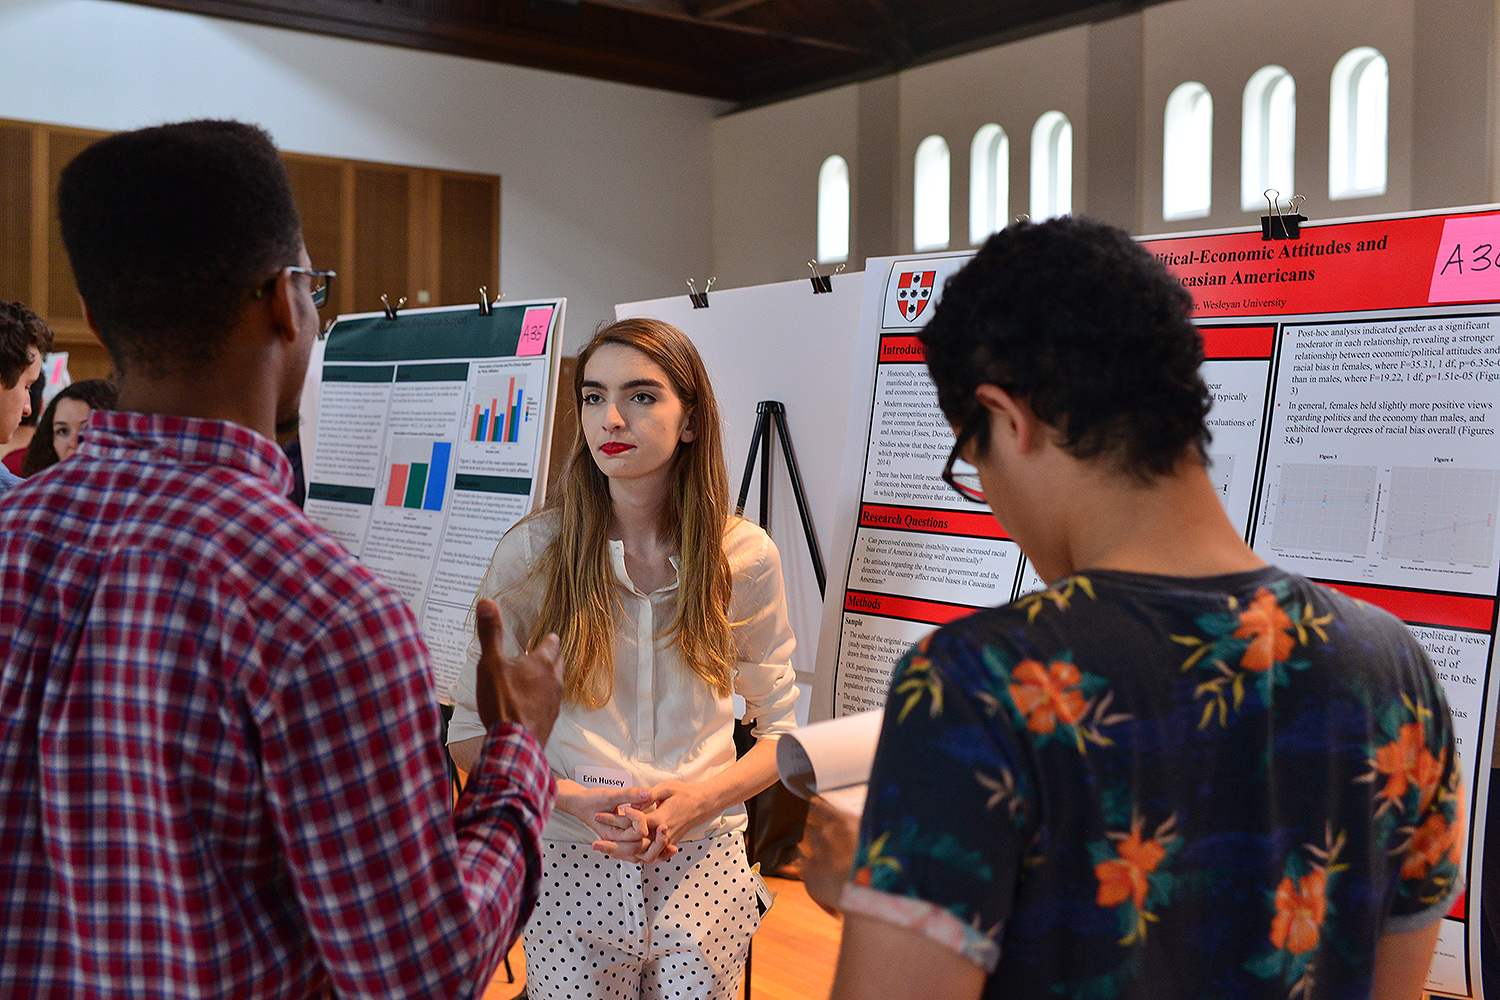 Erin Hussey '20 shared her study titled "The Association Between Political-Economic Attitudes and Racial Bias Among Caucasian Americans."